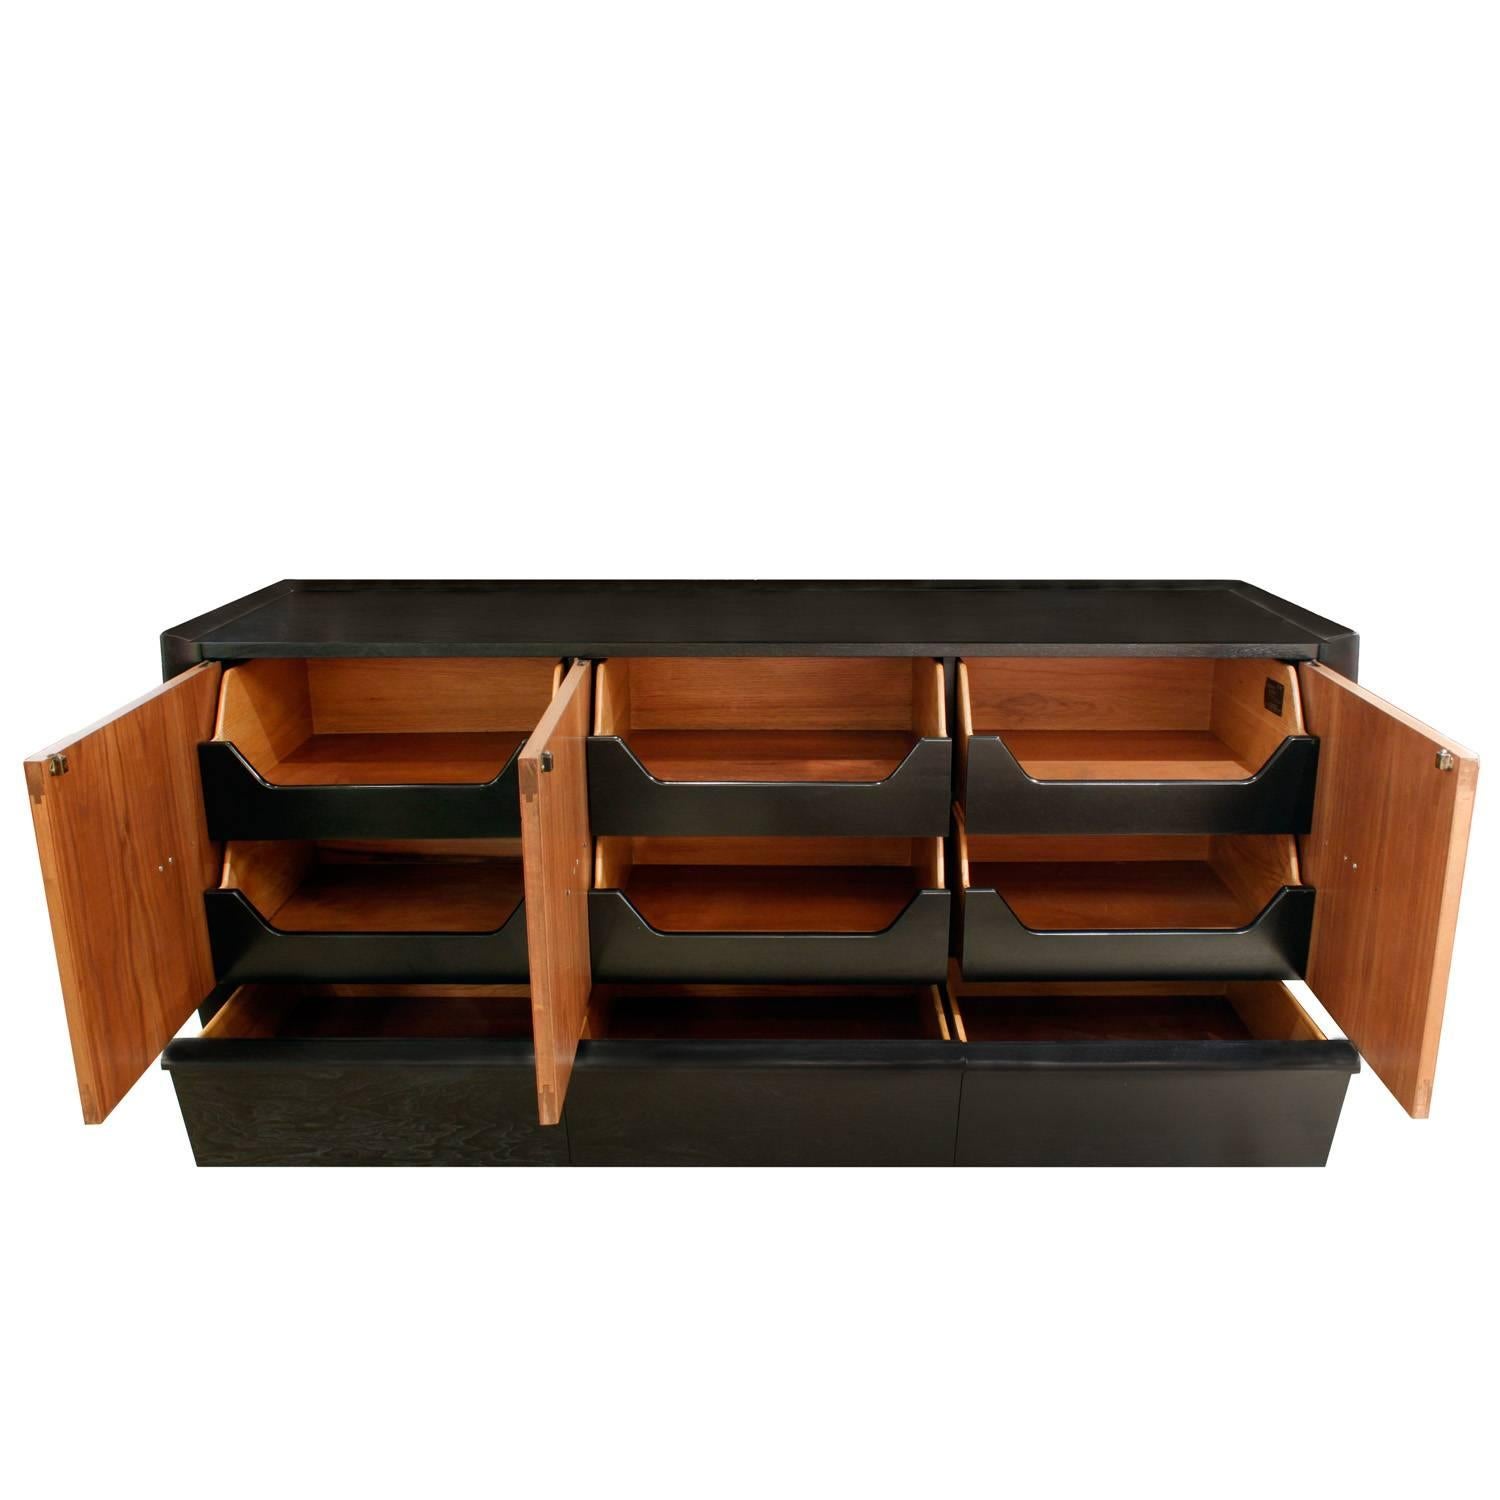 Chic credenza with ebonized case and walnut doors with copper pulls with drawers below, Italian, 1940s.